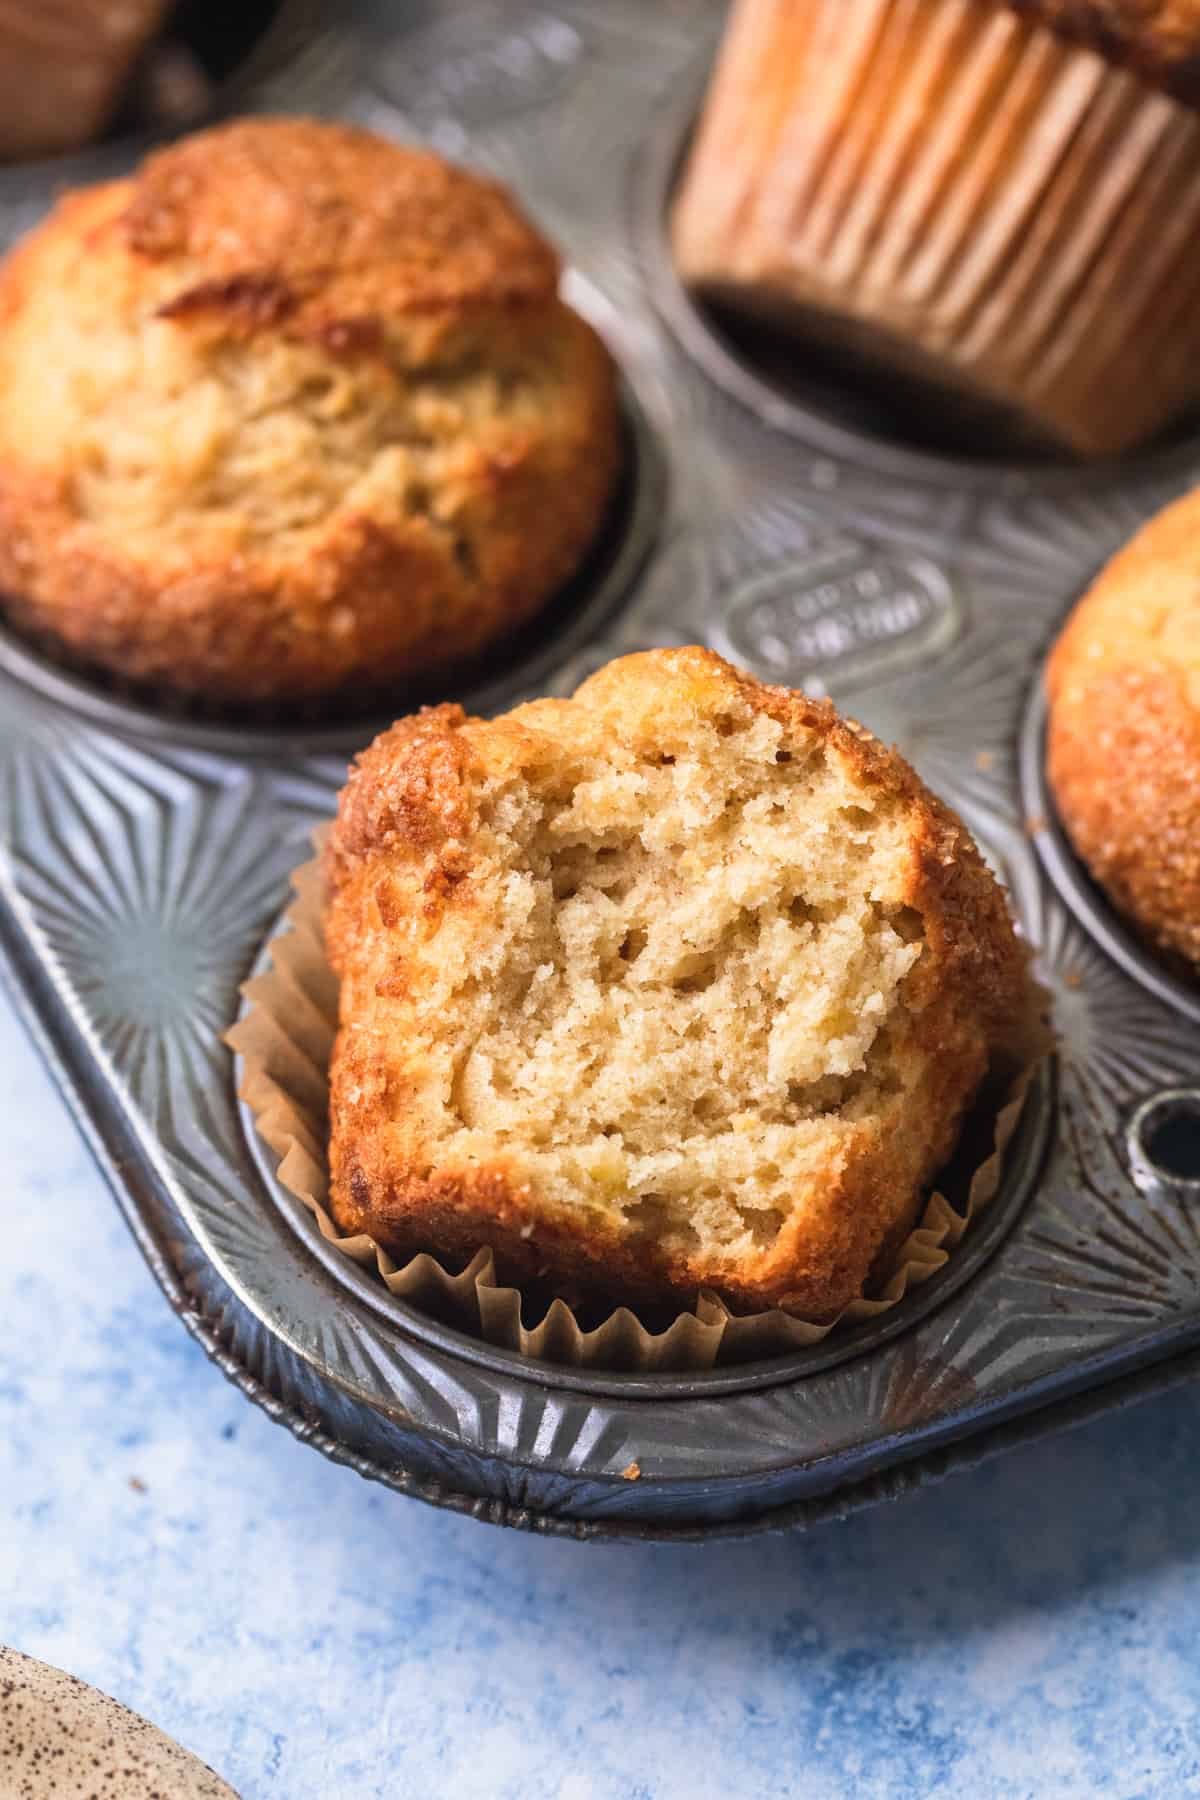 A muffin in a muffin tin with a bite taken out of it.